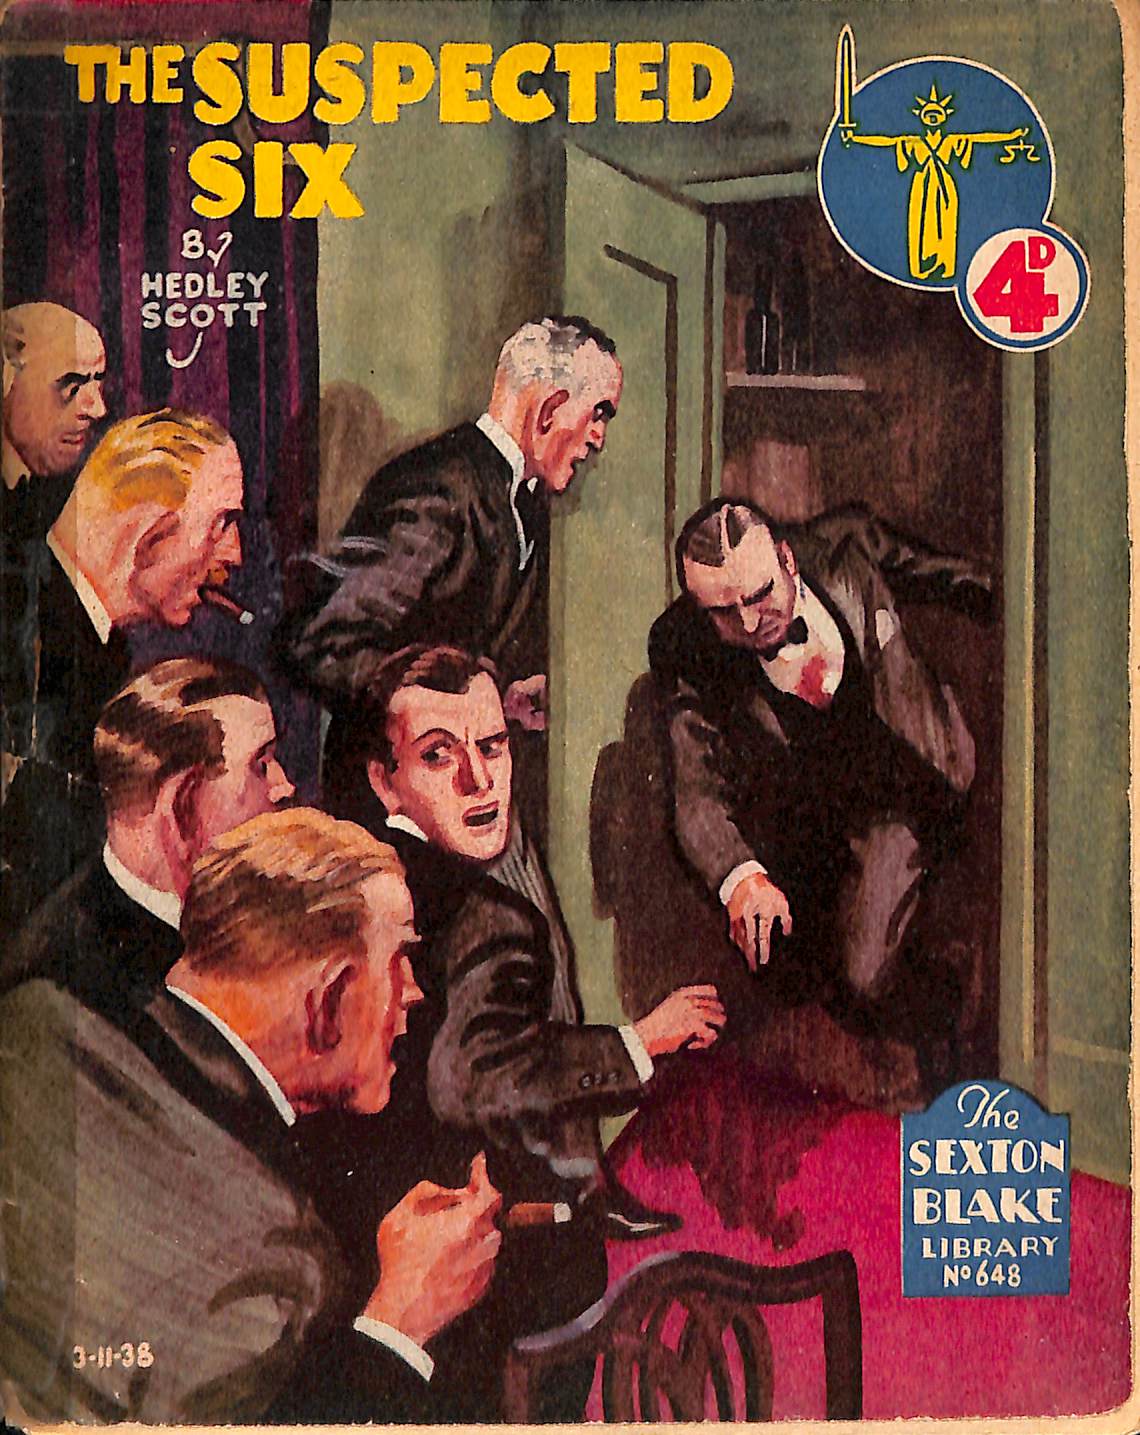 Book Cover For Sexton Blake Library S2 648 - The Suspected Six